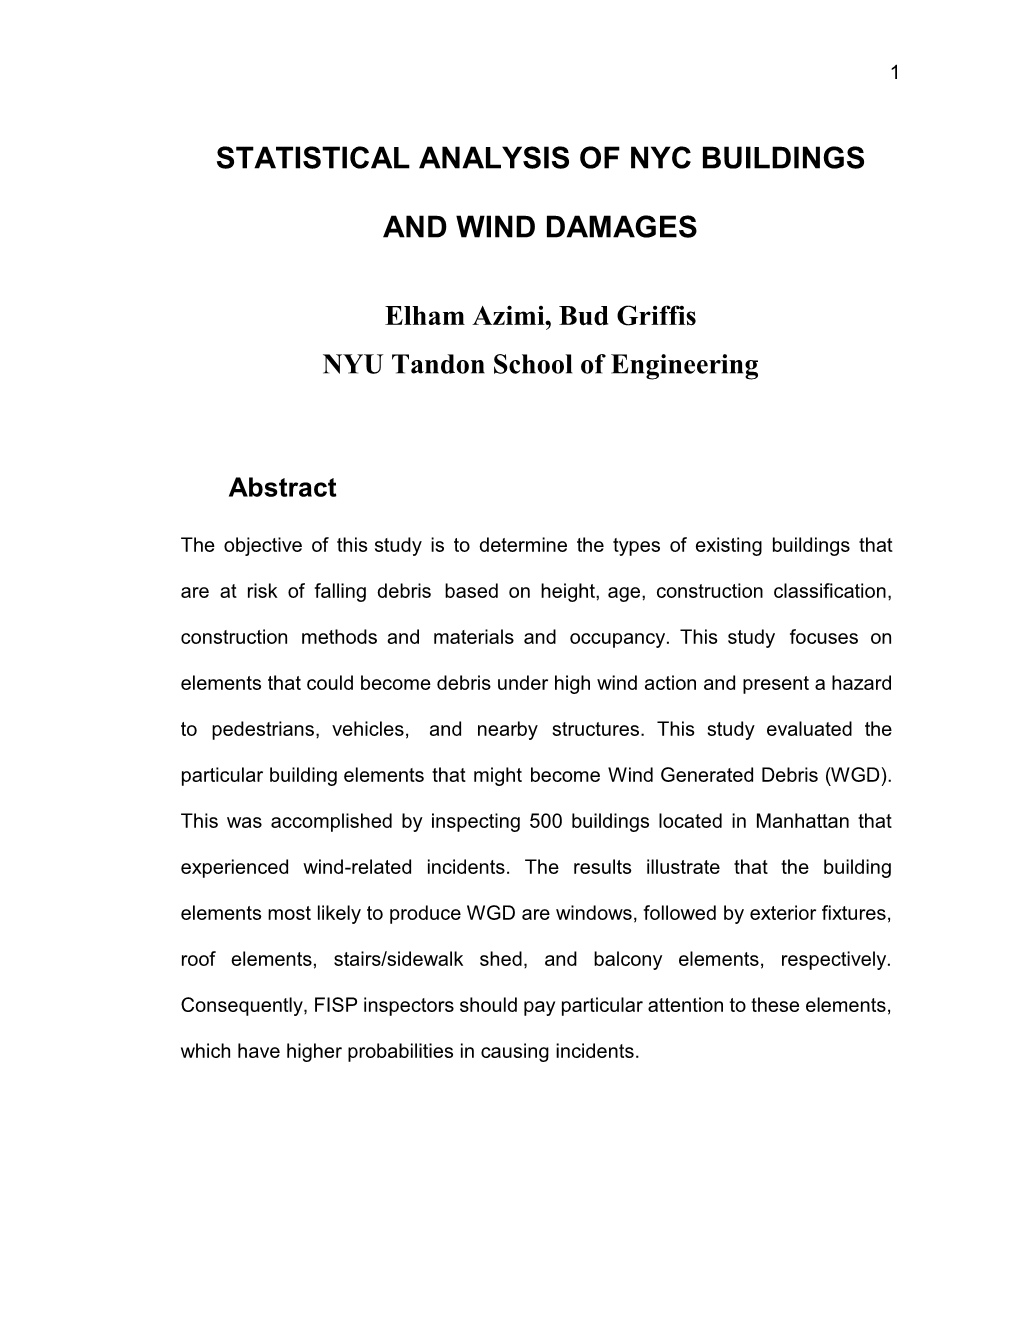 Statistical Analysis of Nyc Buildings and Wind Damages